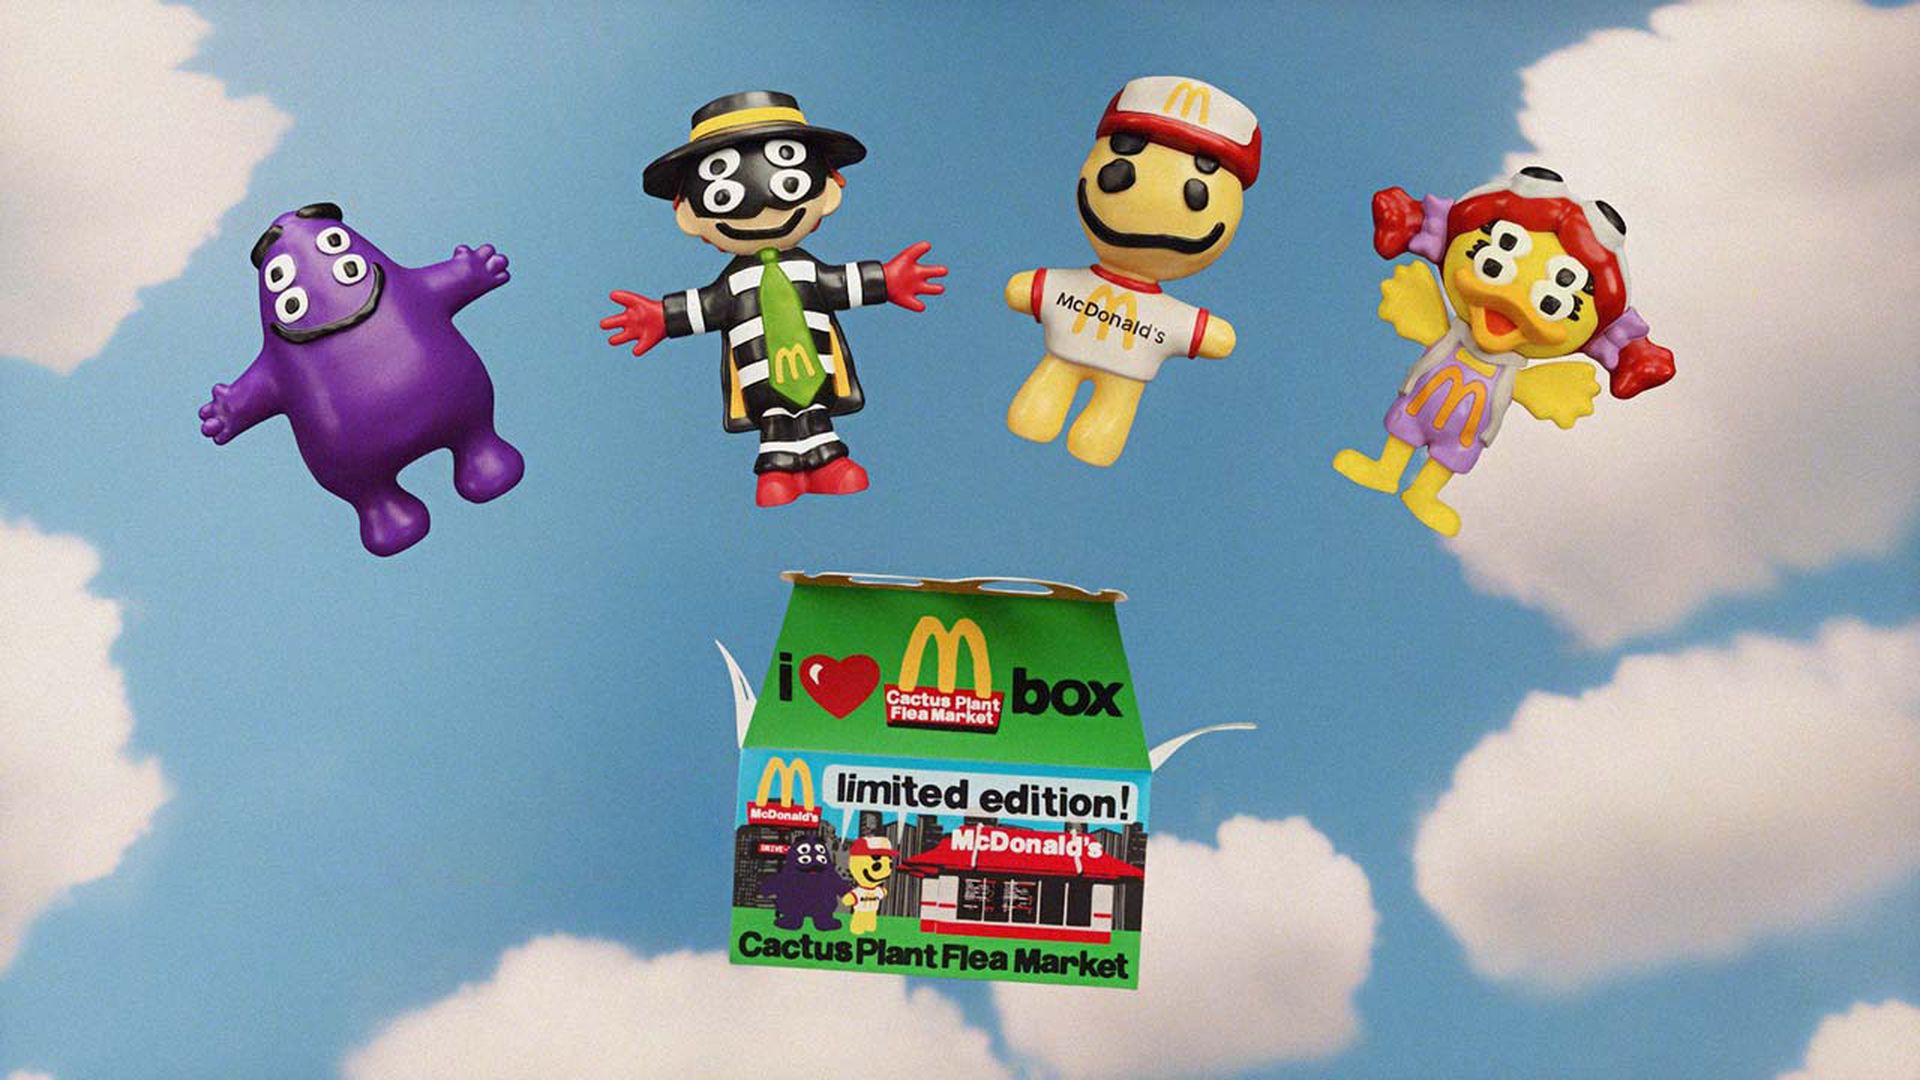 McDonald's toys with meal box that says Cactus Plant Flea Market